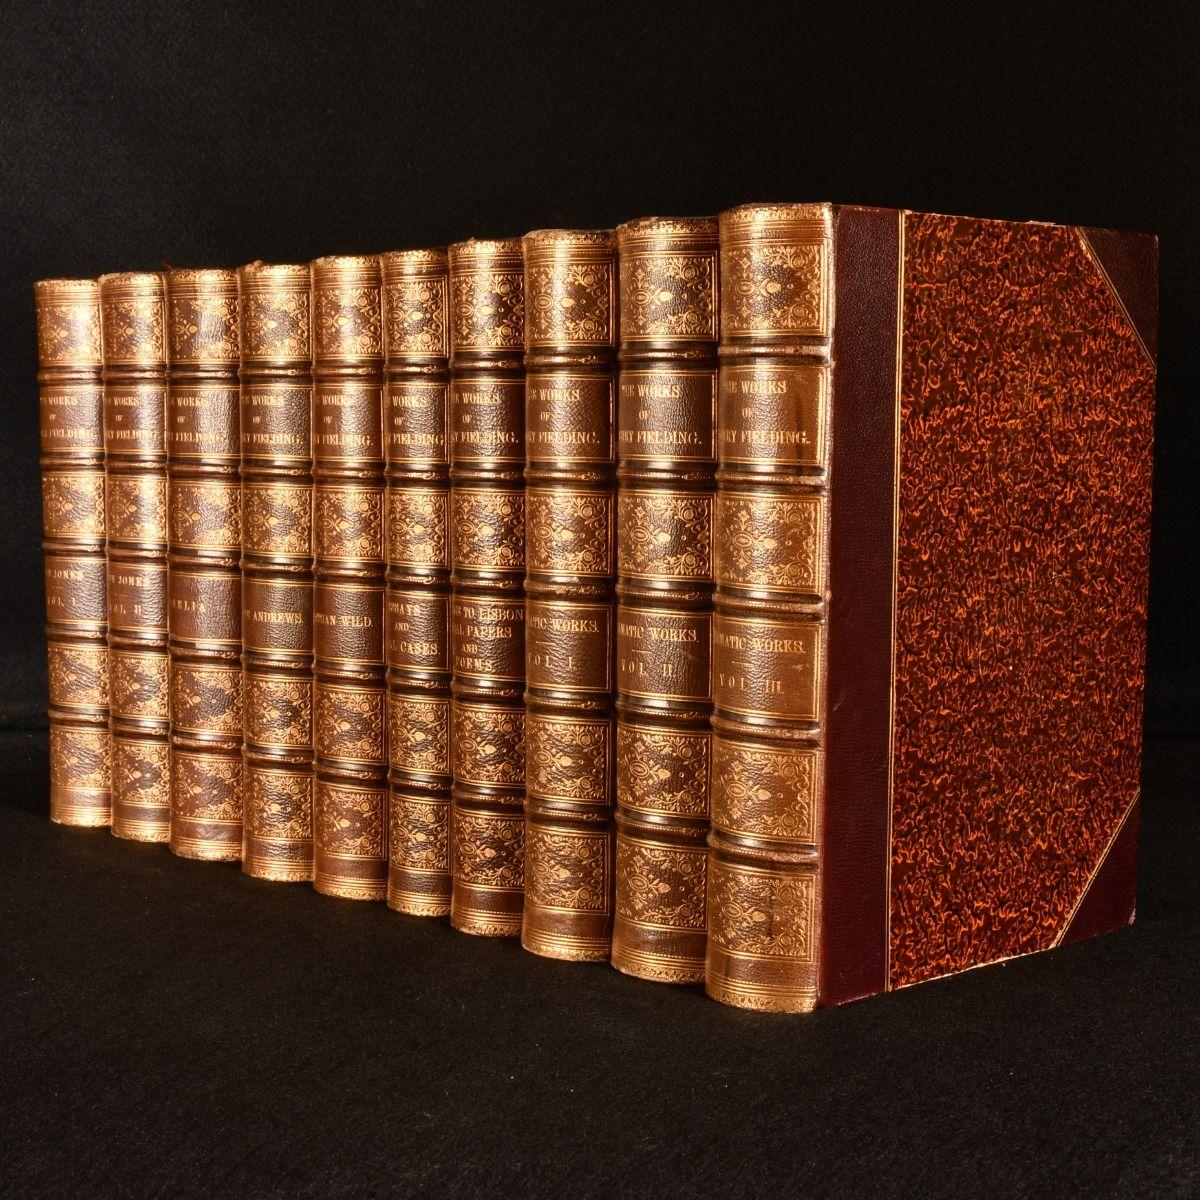 A limited edition ten-volume set of the works of Henry Fielding, edited with a biography by Leslie Stephen.

A ten-volume set in half morocco bindings. All edges gilt.

No. 92 of a thousand limited edition copies of this edition printed for sale in